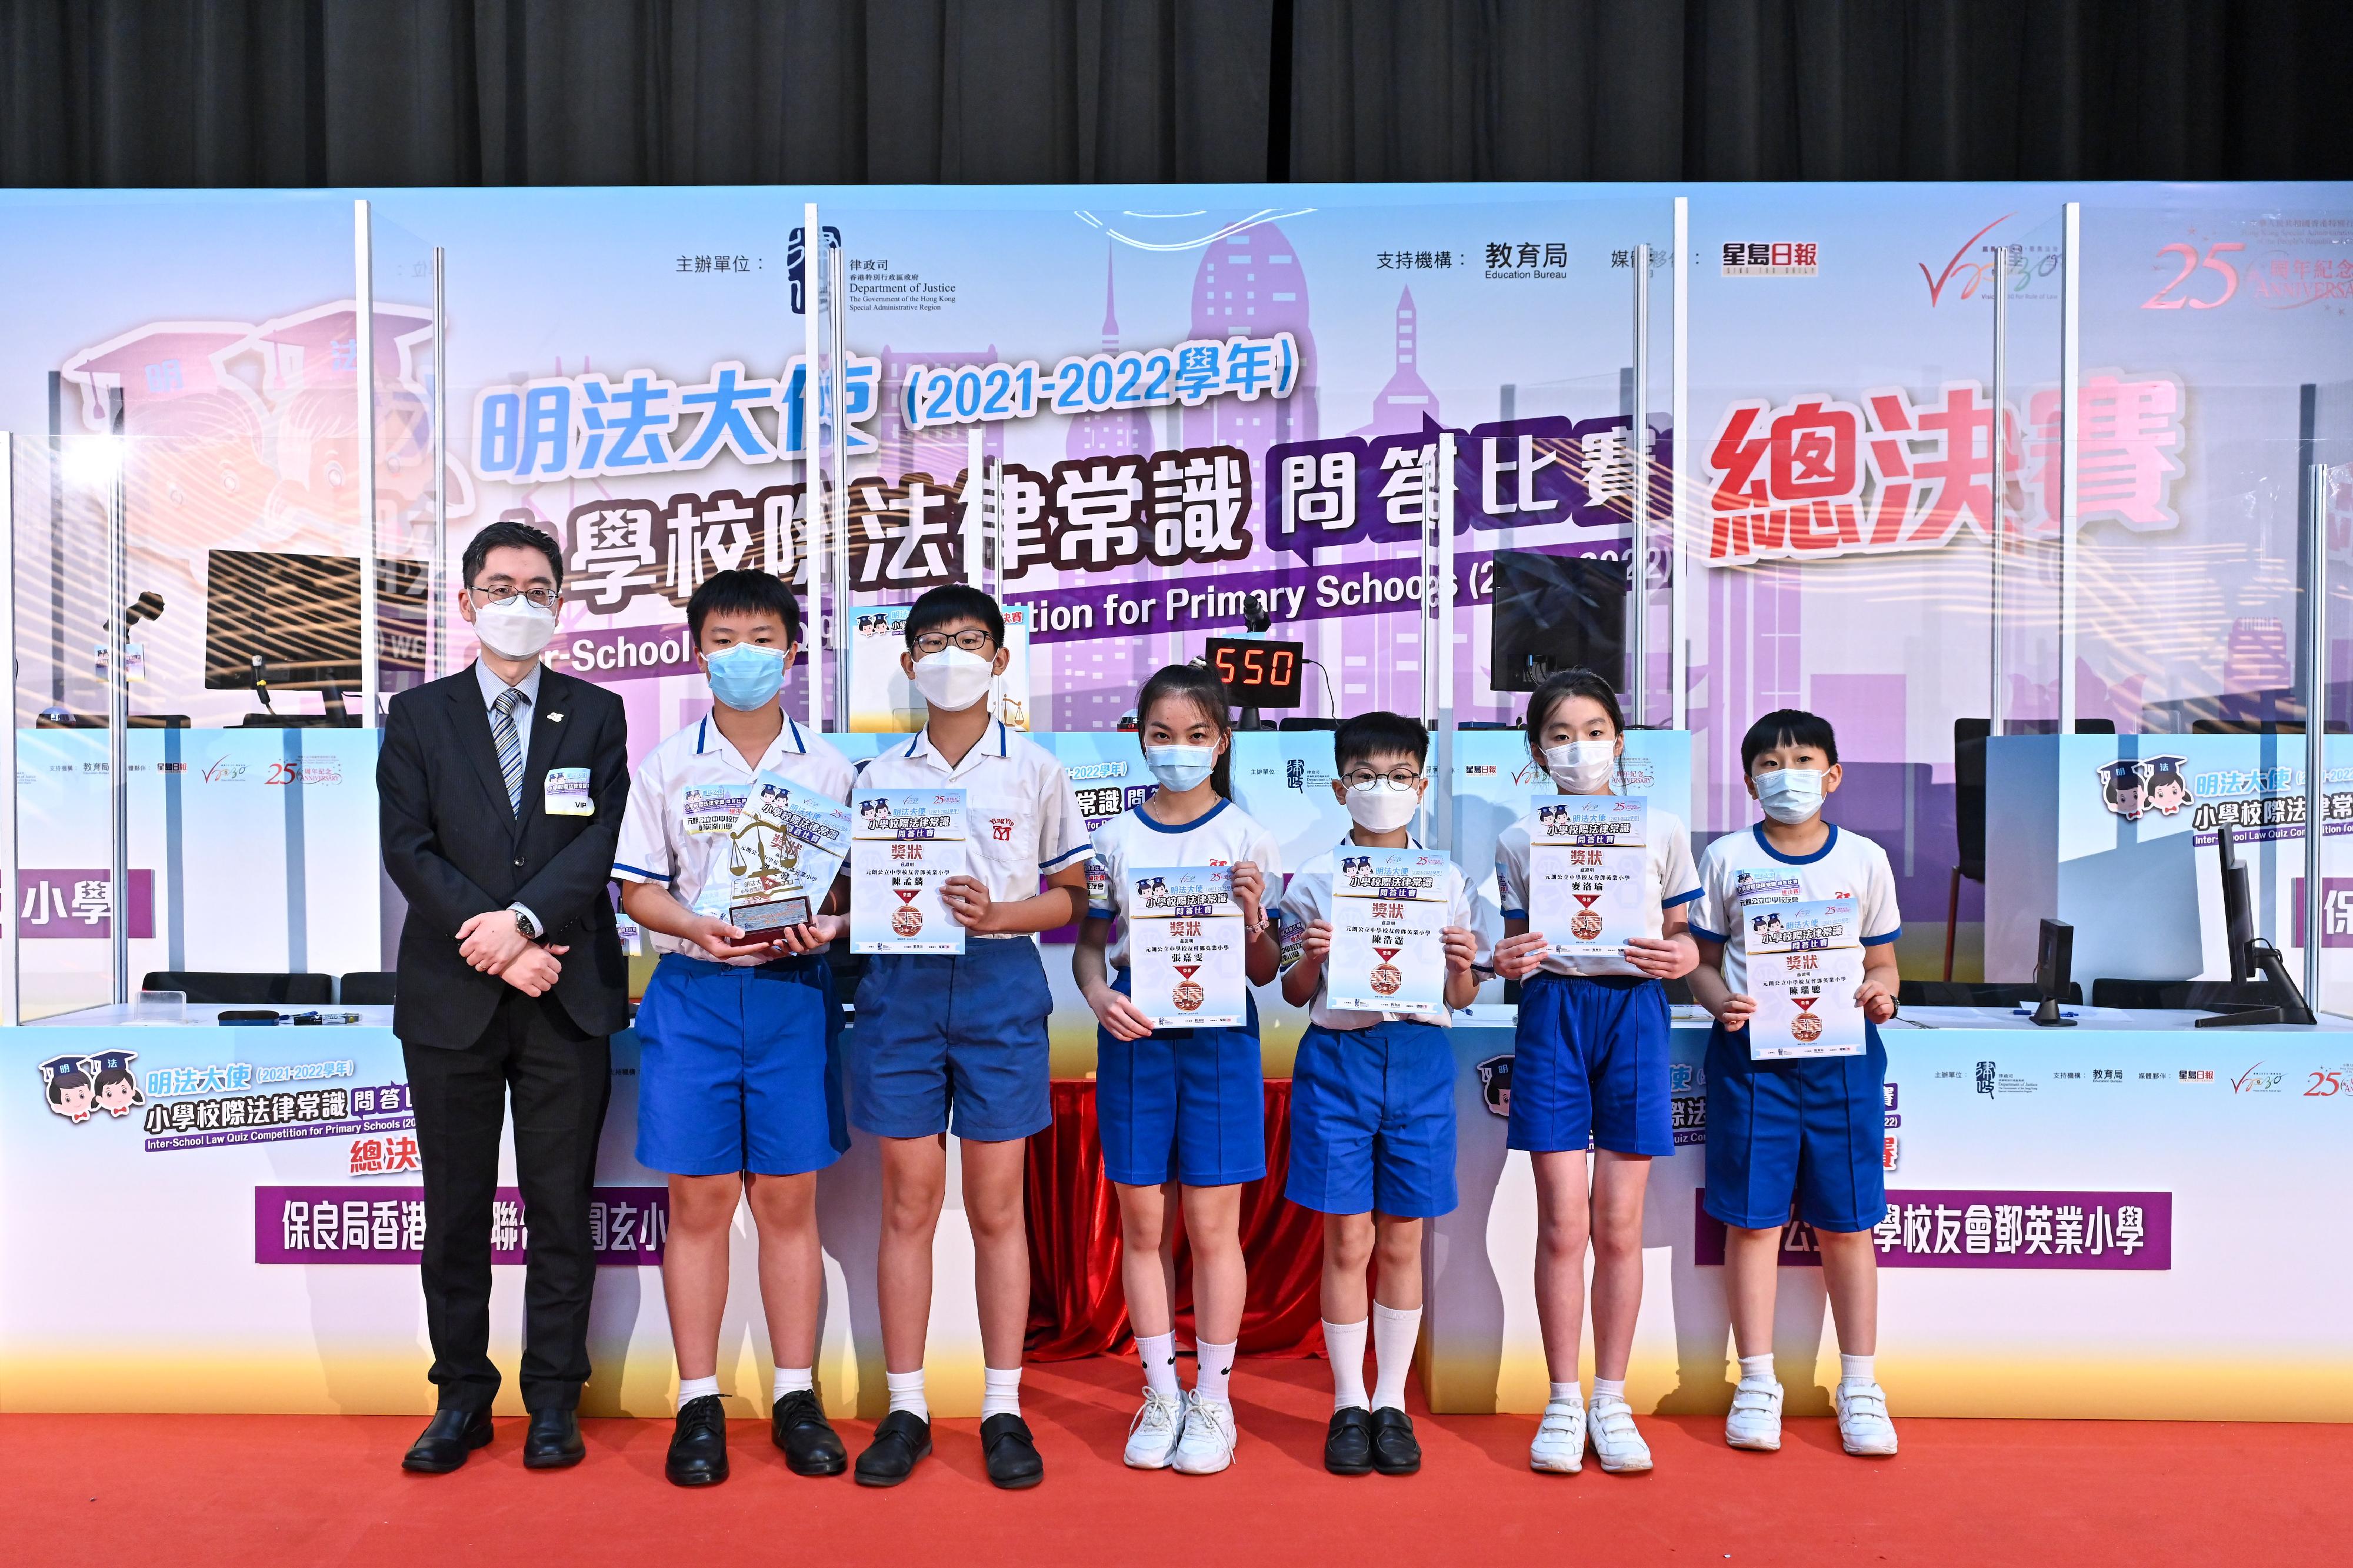 The Grand Final of the Inter-School Law Quiz Competition for primary school students, organised by the Department of Justice (DoJ) and supported by the Education Bureau, was successfully held today (June 27) at the M+ museum. Photo shows the Commissioner of Inclusive Dispute Avoidance and Resolution Office of the DoJ, Dr James Ding (first left), presenting the award to the second runner-up, Yuen Long Public Middle School Alumni Association Tang Ying Yip Primary School.
